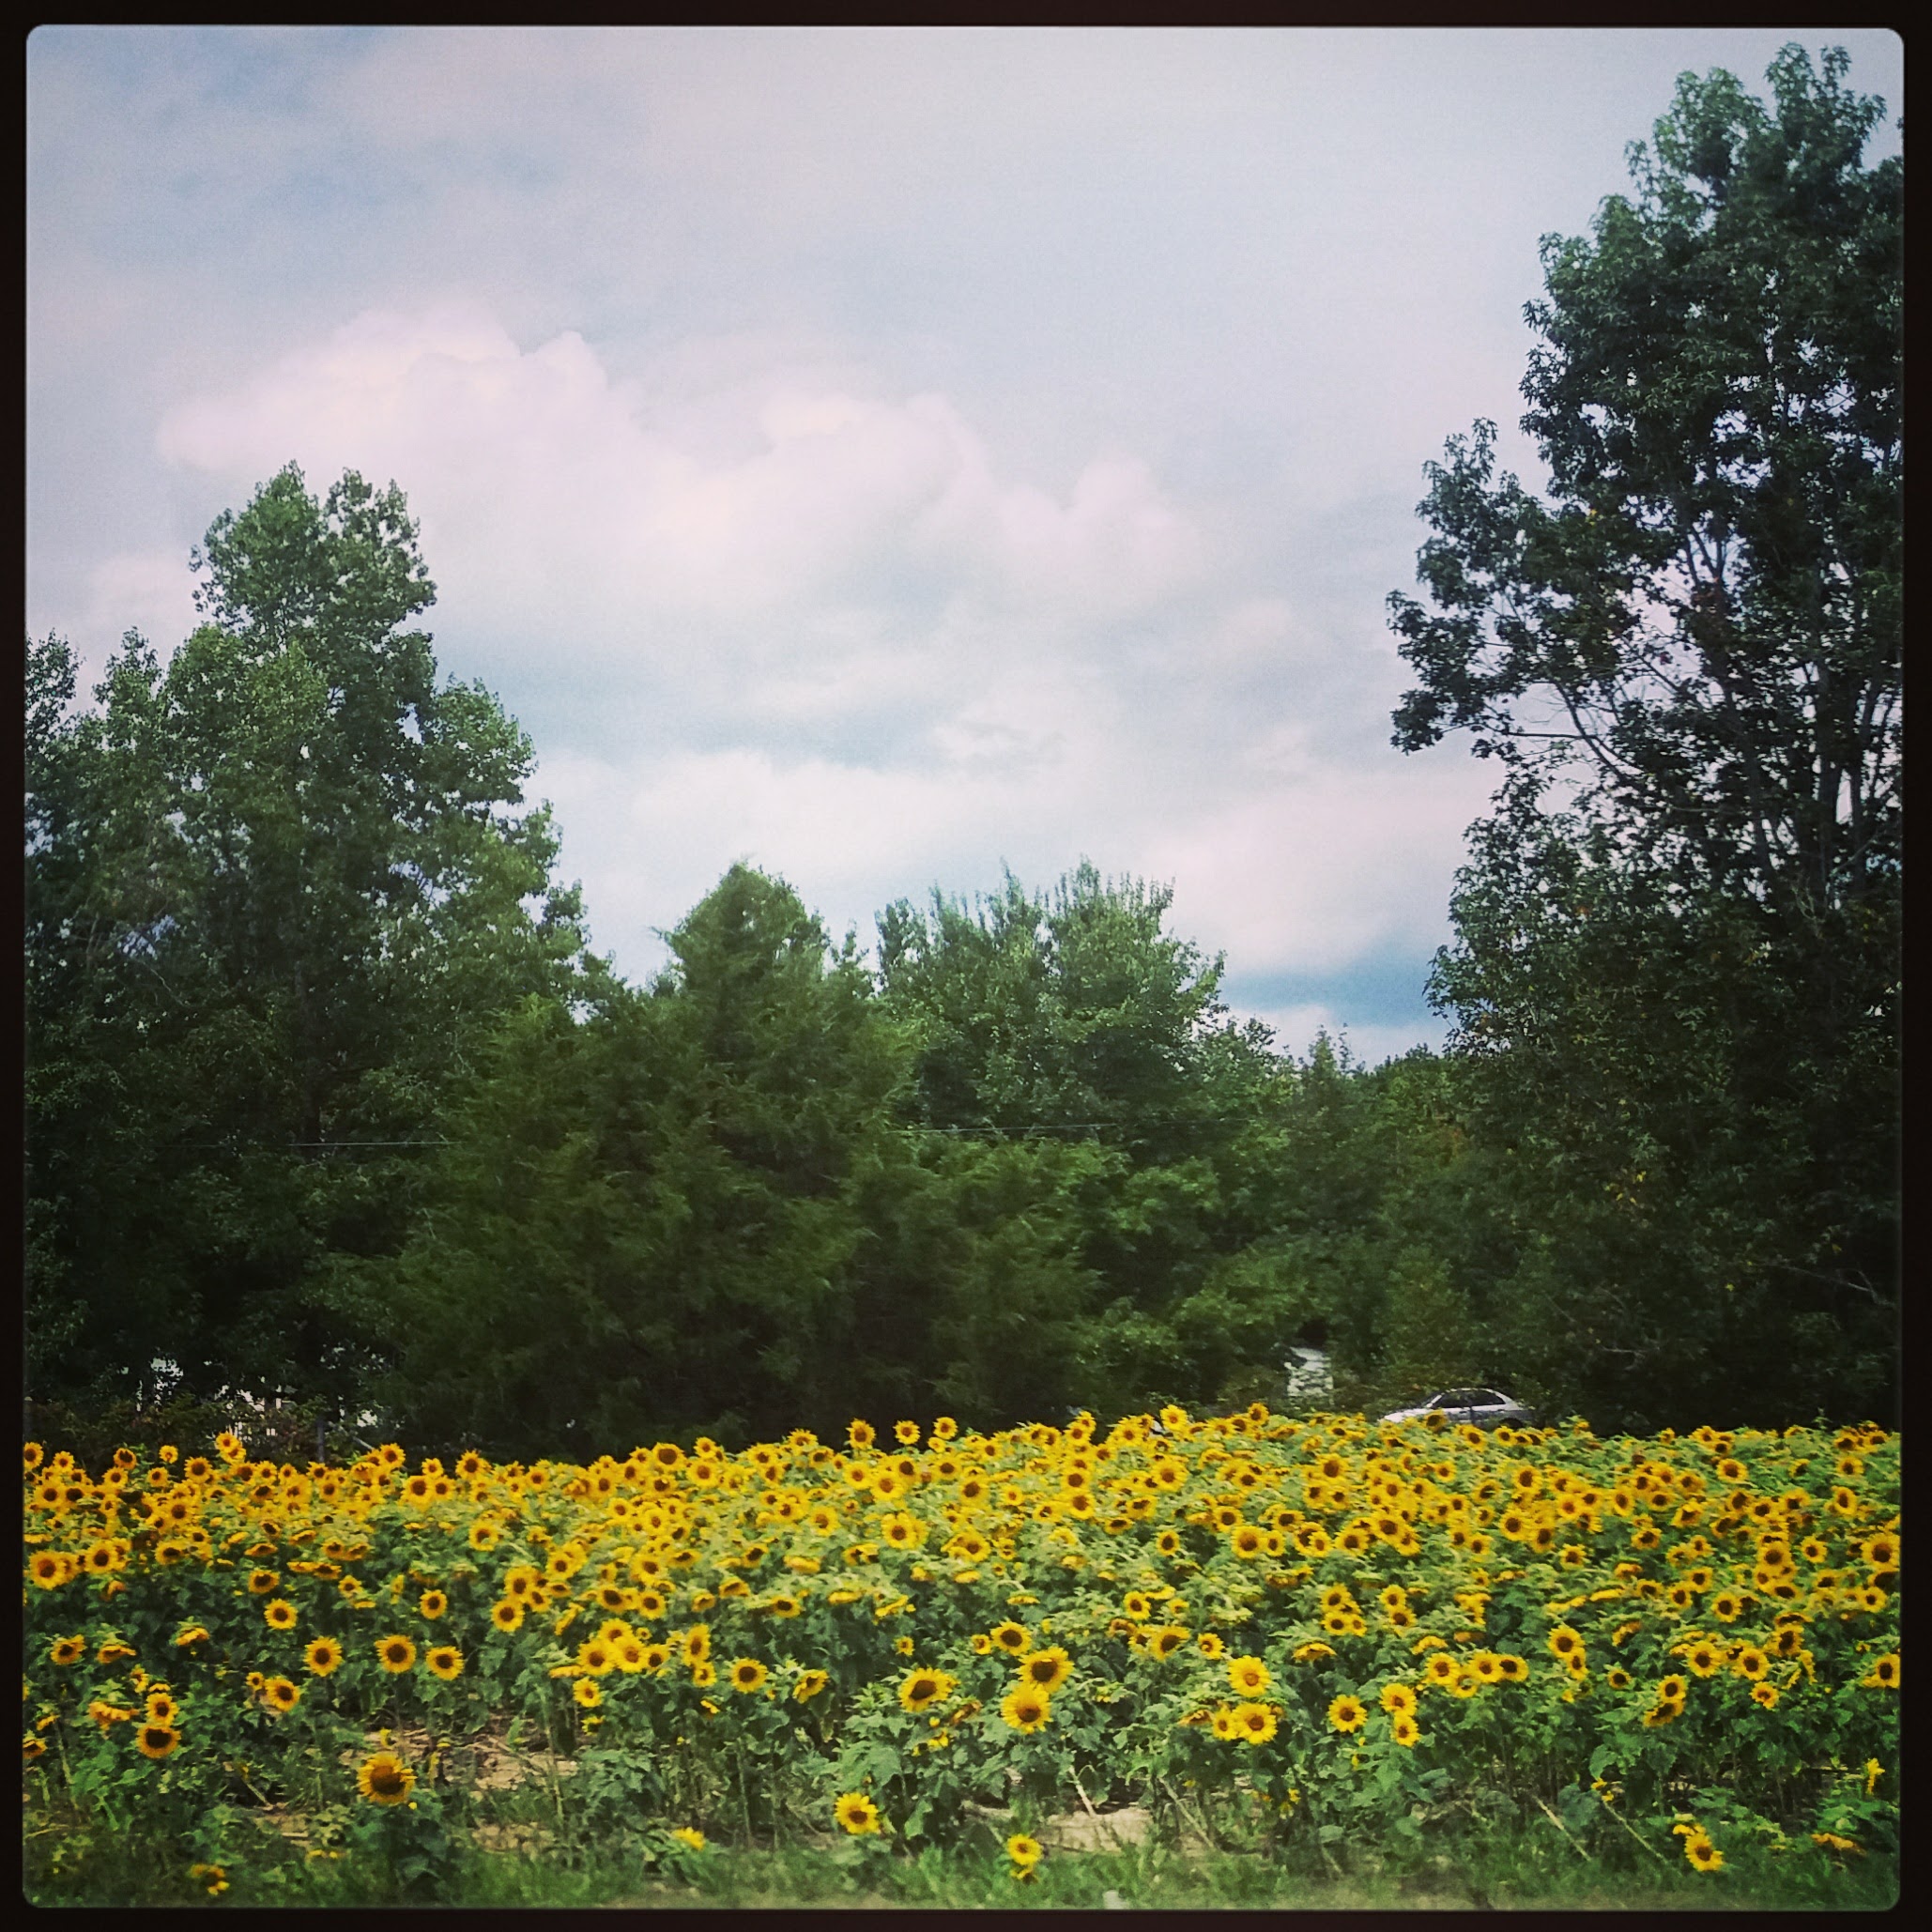 Sunflowers on the side of the road (Georgia?)